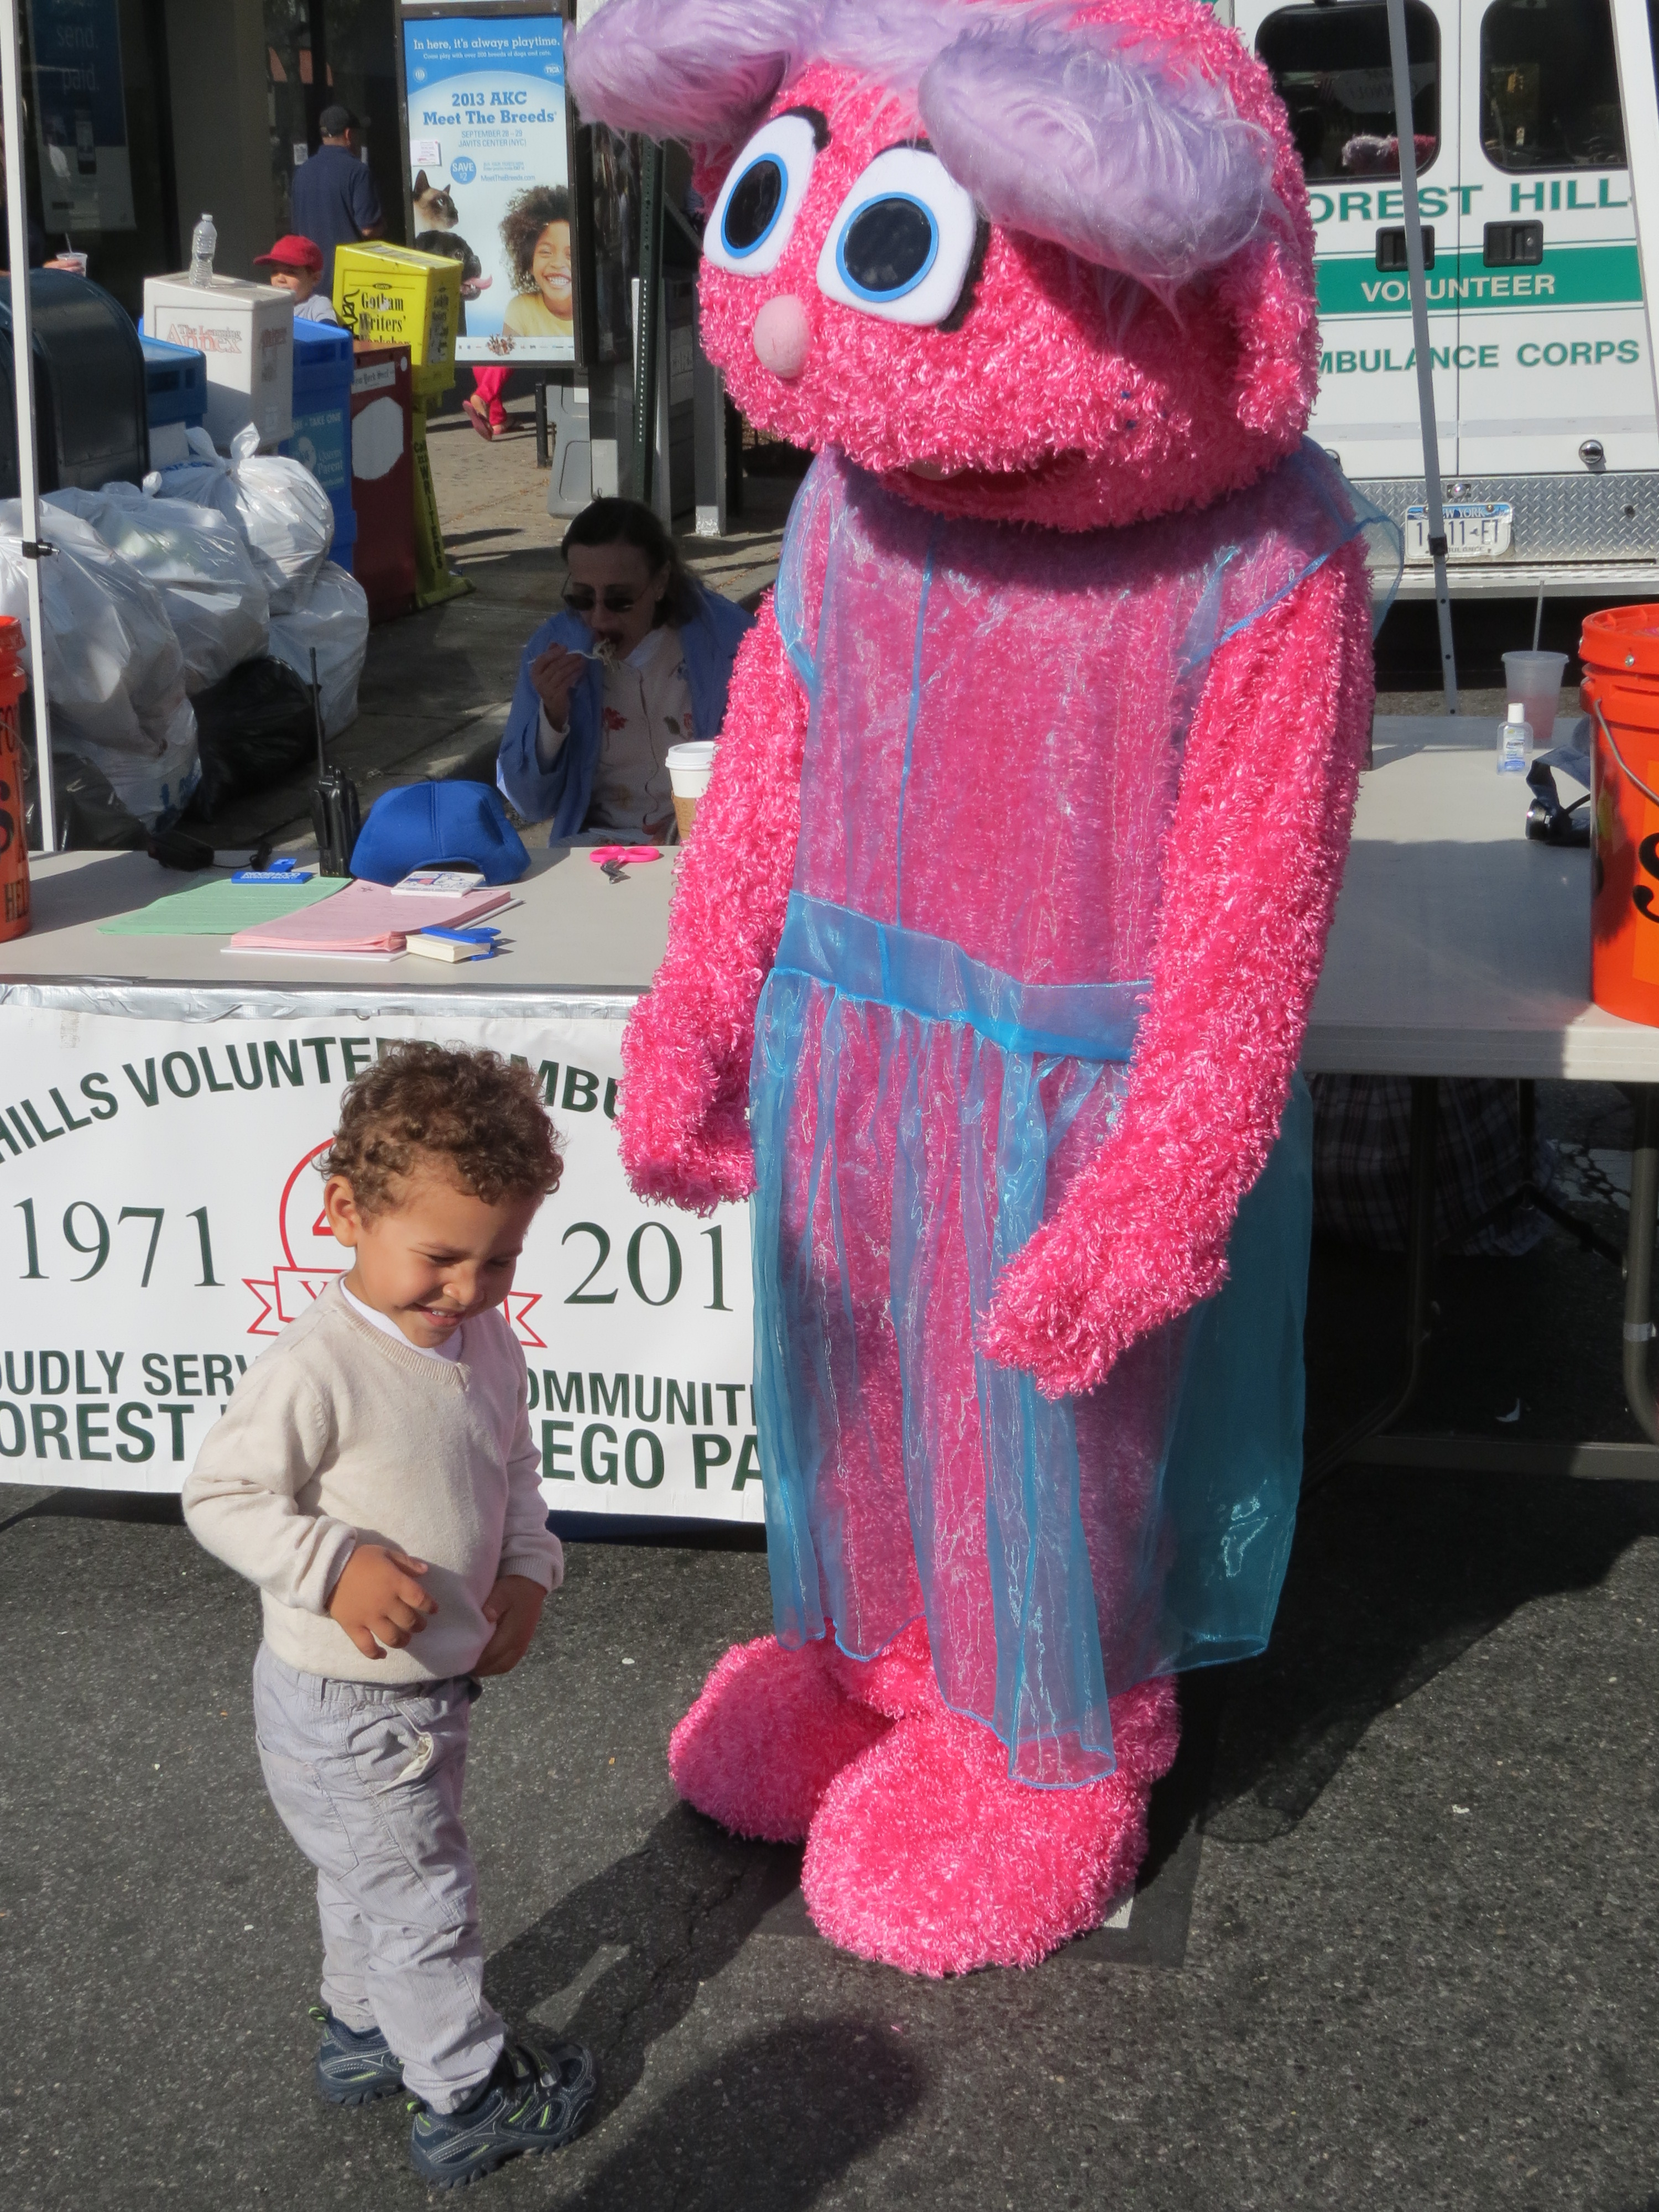 Mason Ramirez, 3, of Fresh Meadows was thrilled to spend time with "Abby," a furry friend who entertained fair goers at the Forest Hills Volunteer Ambulance Corps' stand. The costumed character is part of the nonprofit Party Pals NYC, which provides entertainment for a variety of events to raise money for a wide range of causes, including the Kidney Foundation and the Brain Cancer Foundation.